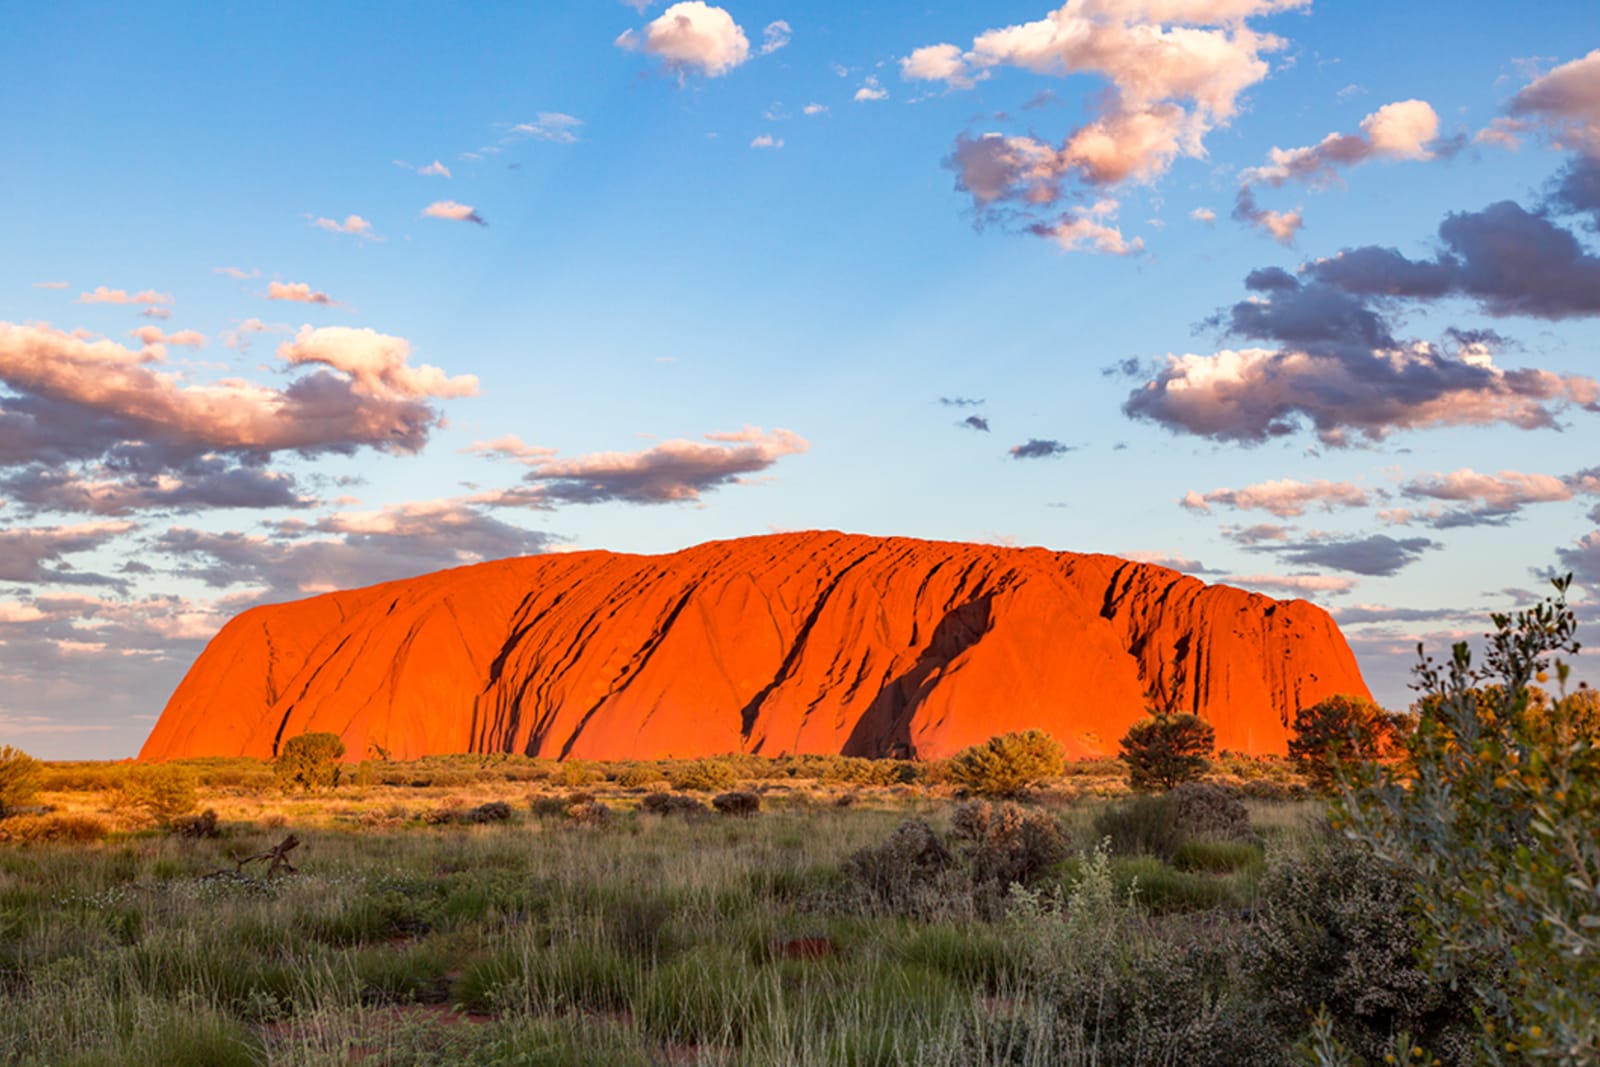 Uluru is one of the best places to visit in the Australian outback